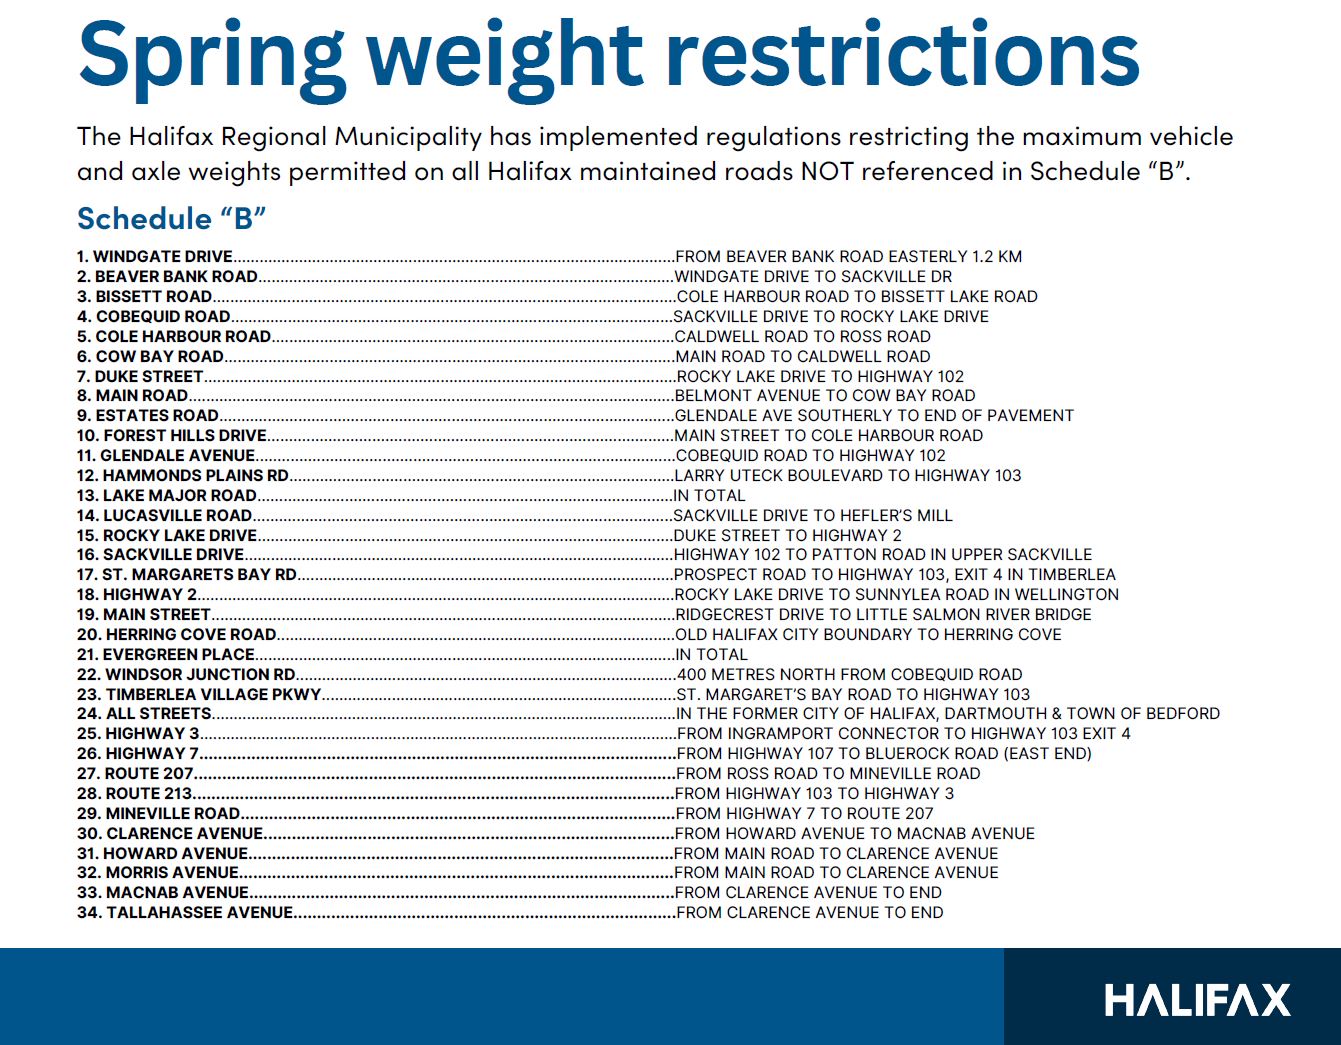 List of spring weight restrictions